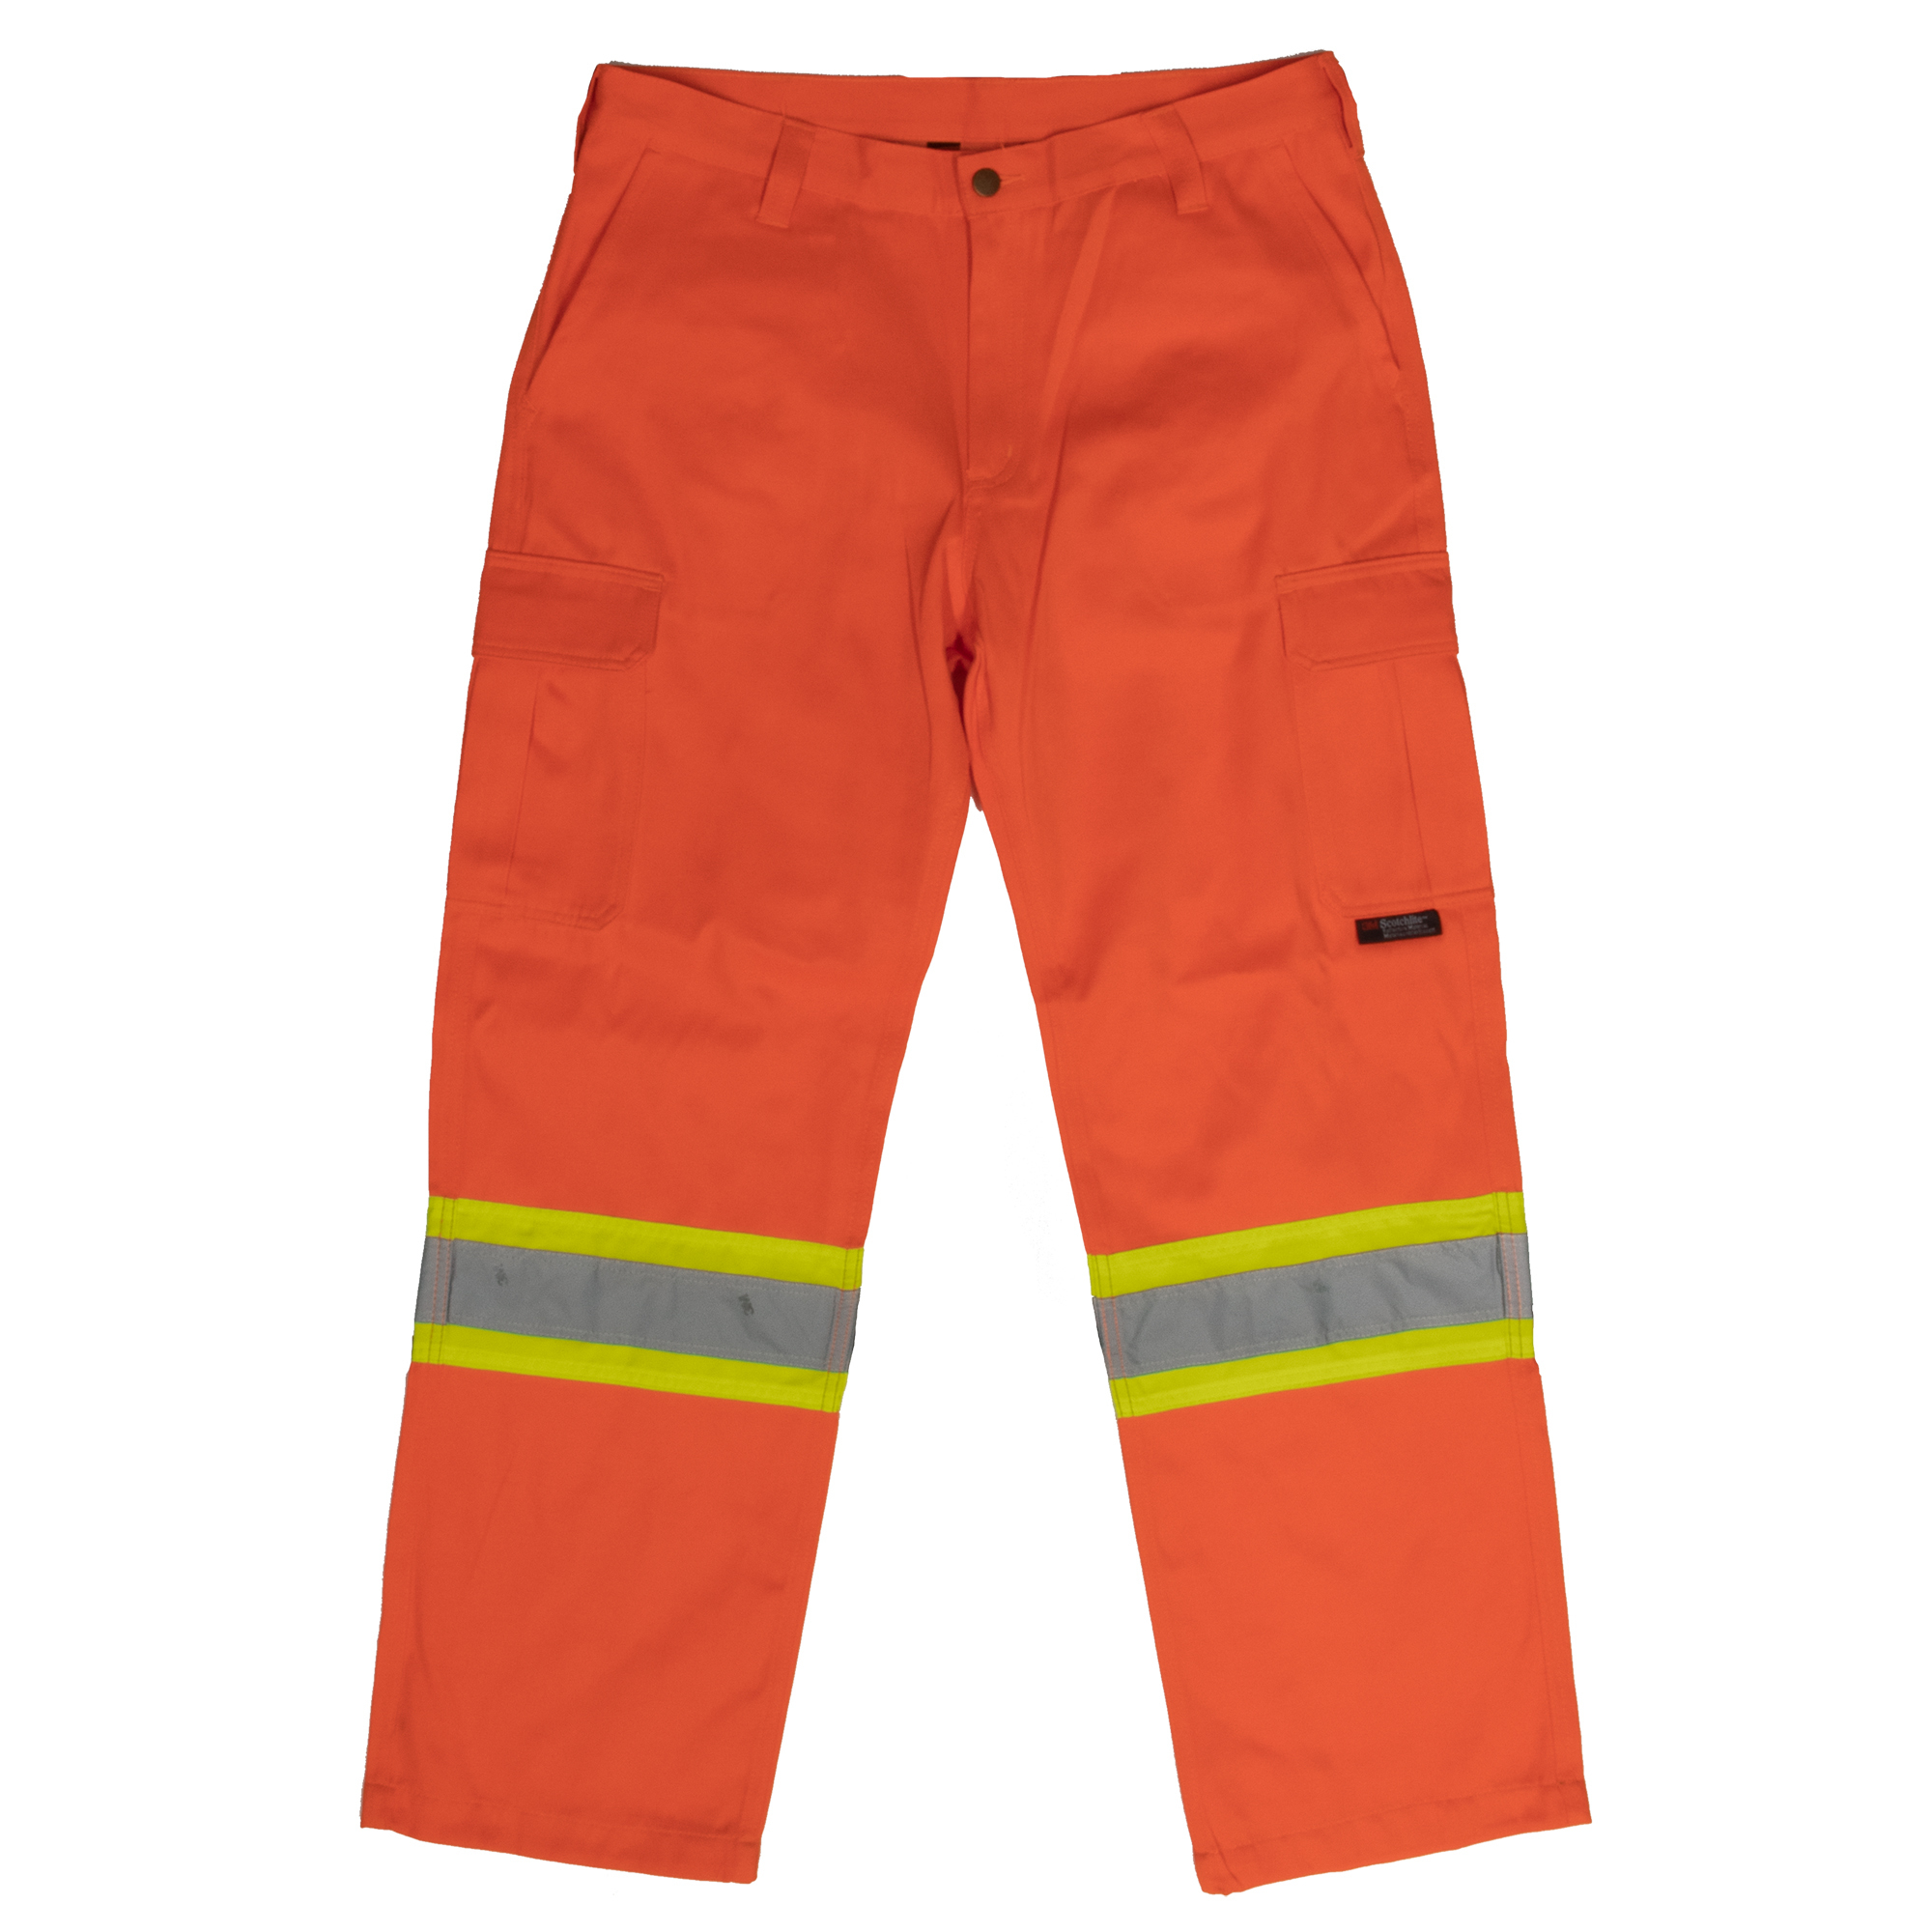 Tough Duck, Safety Cargo Work Pant, Waist 40 in, Inseam 30 in, Color Fluorescent Orange, Model SP010